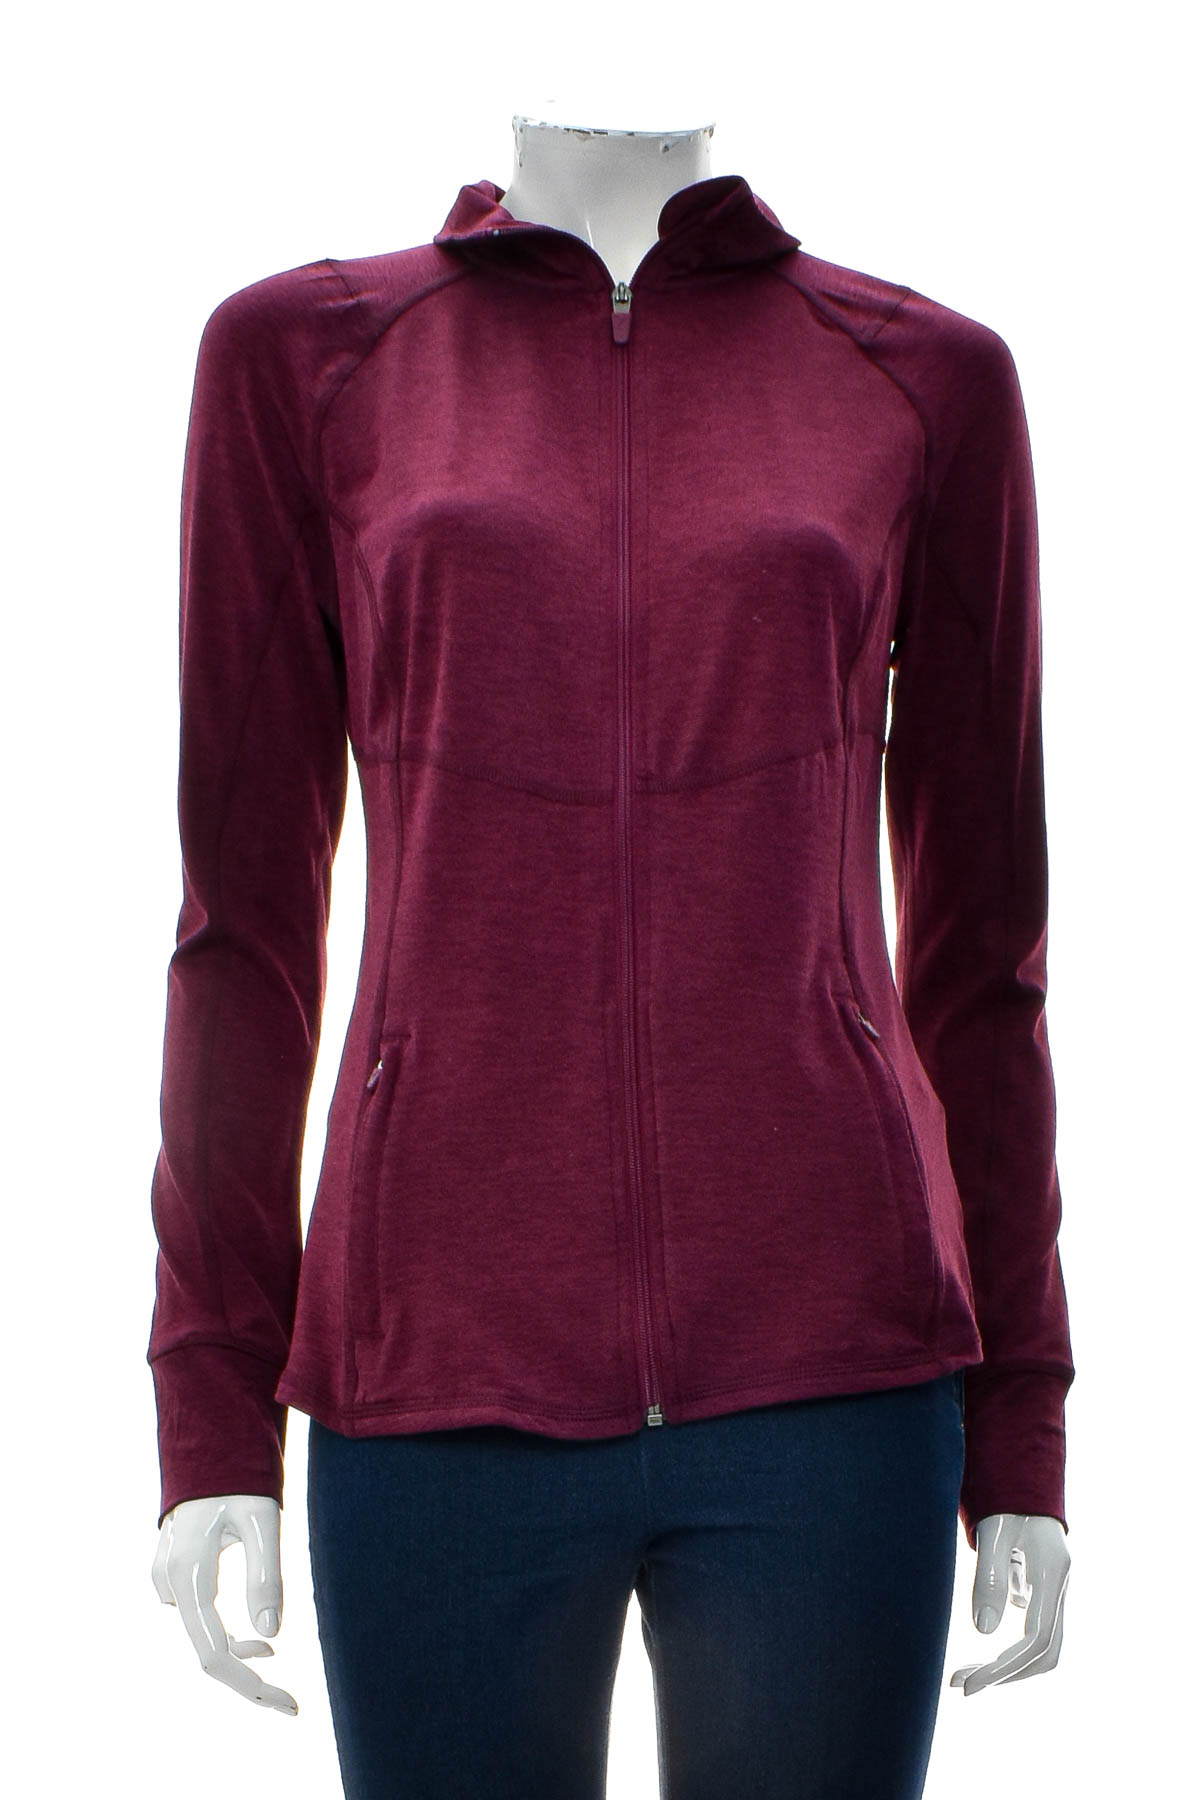 Female sports top - OLD NAVY ACTIVE - 0